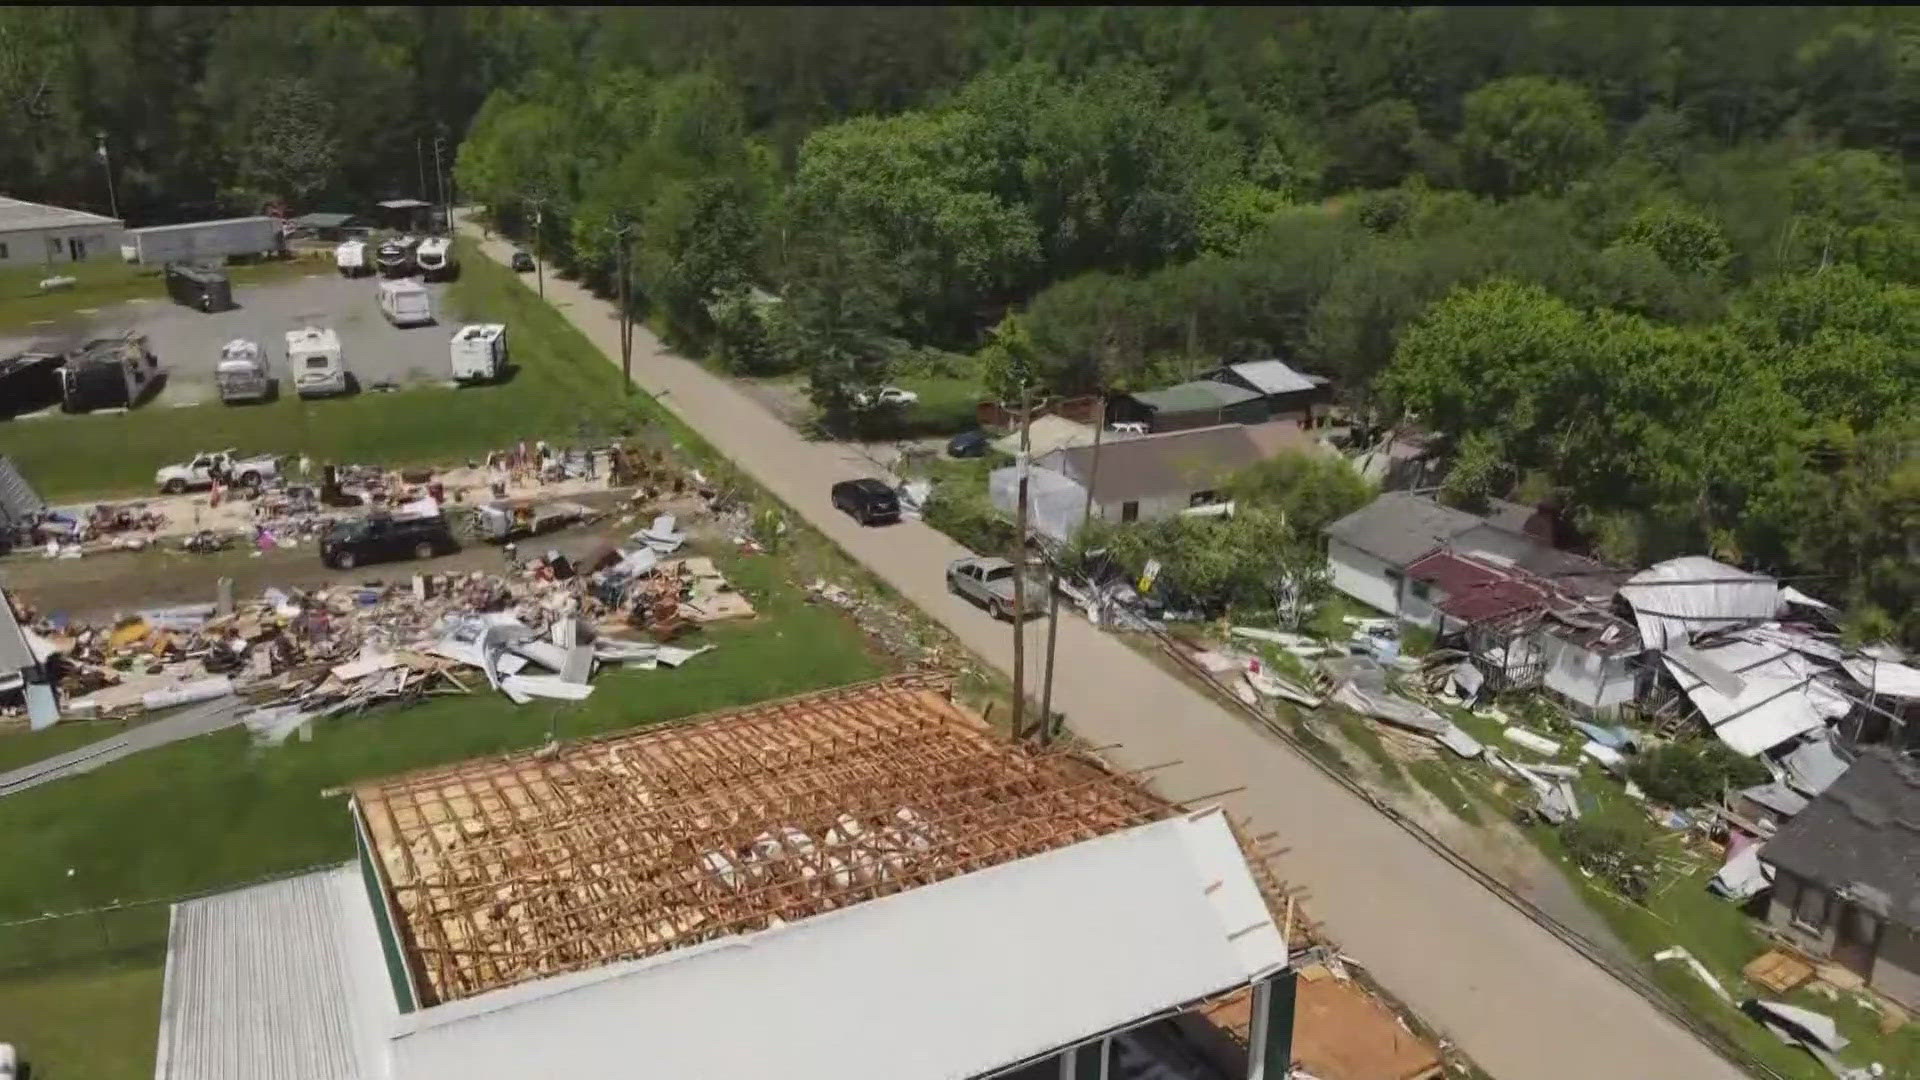 Clean-up efforts continue after the tornado left behind a trail of damage.